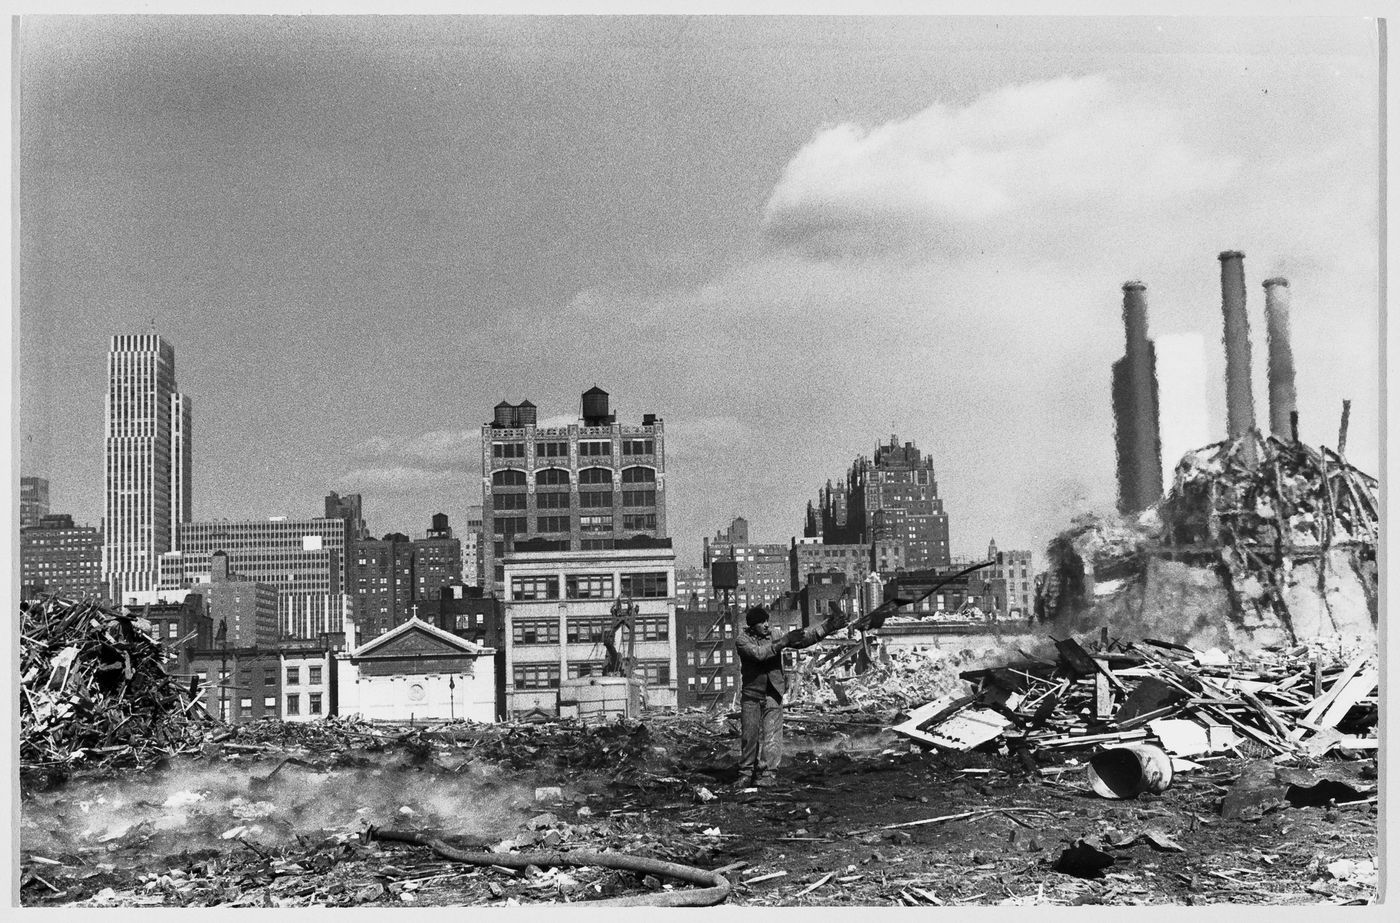 View of a demolition site [?] showing a man and fire hose with skyscrapers and smokestacks in the background, New York City, New York